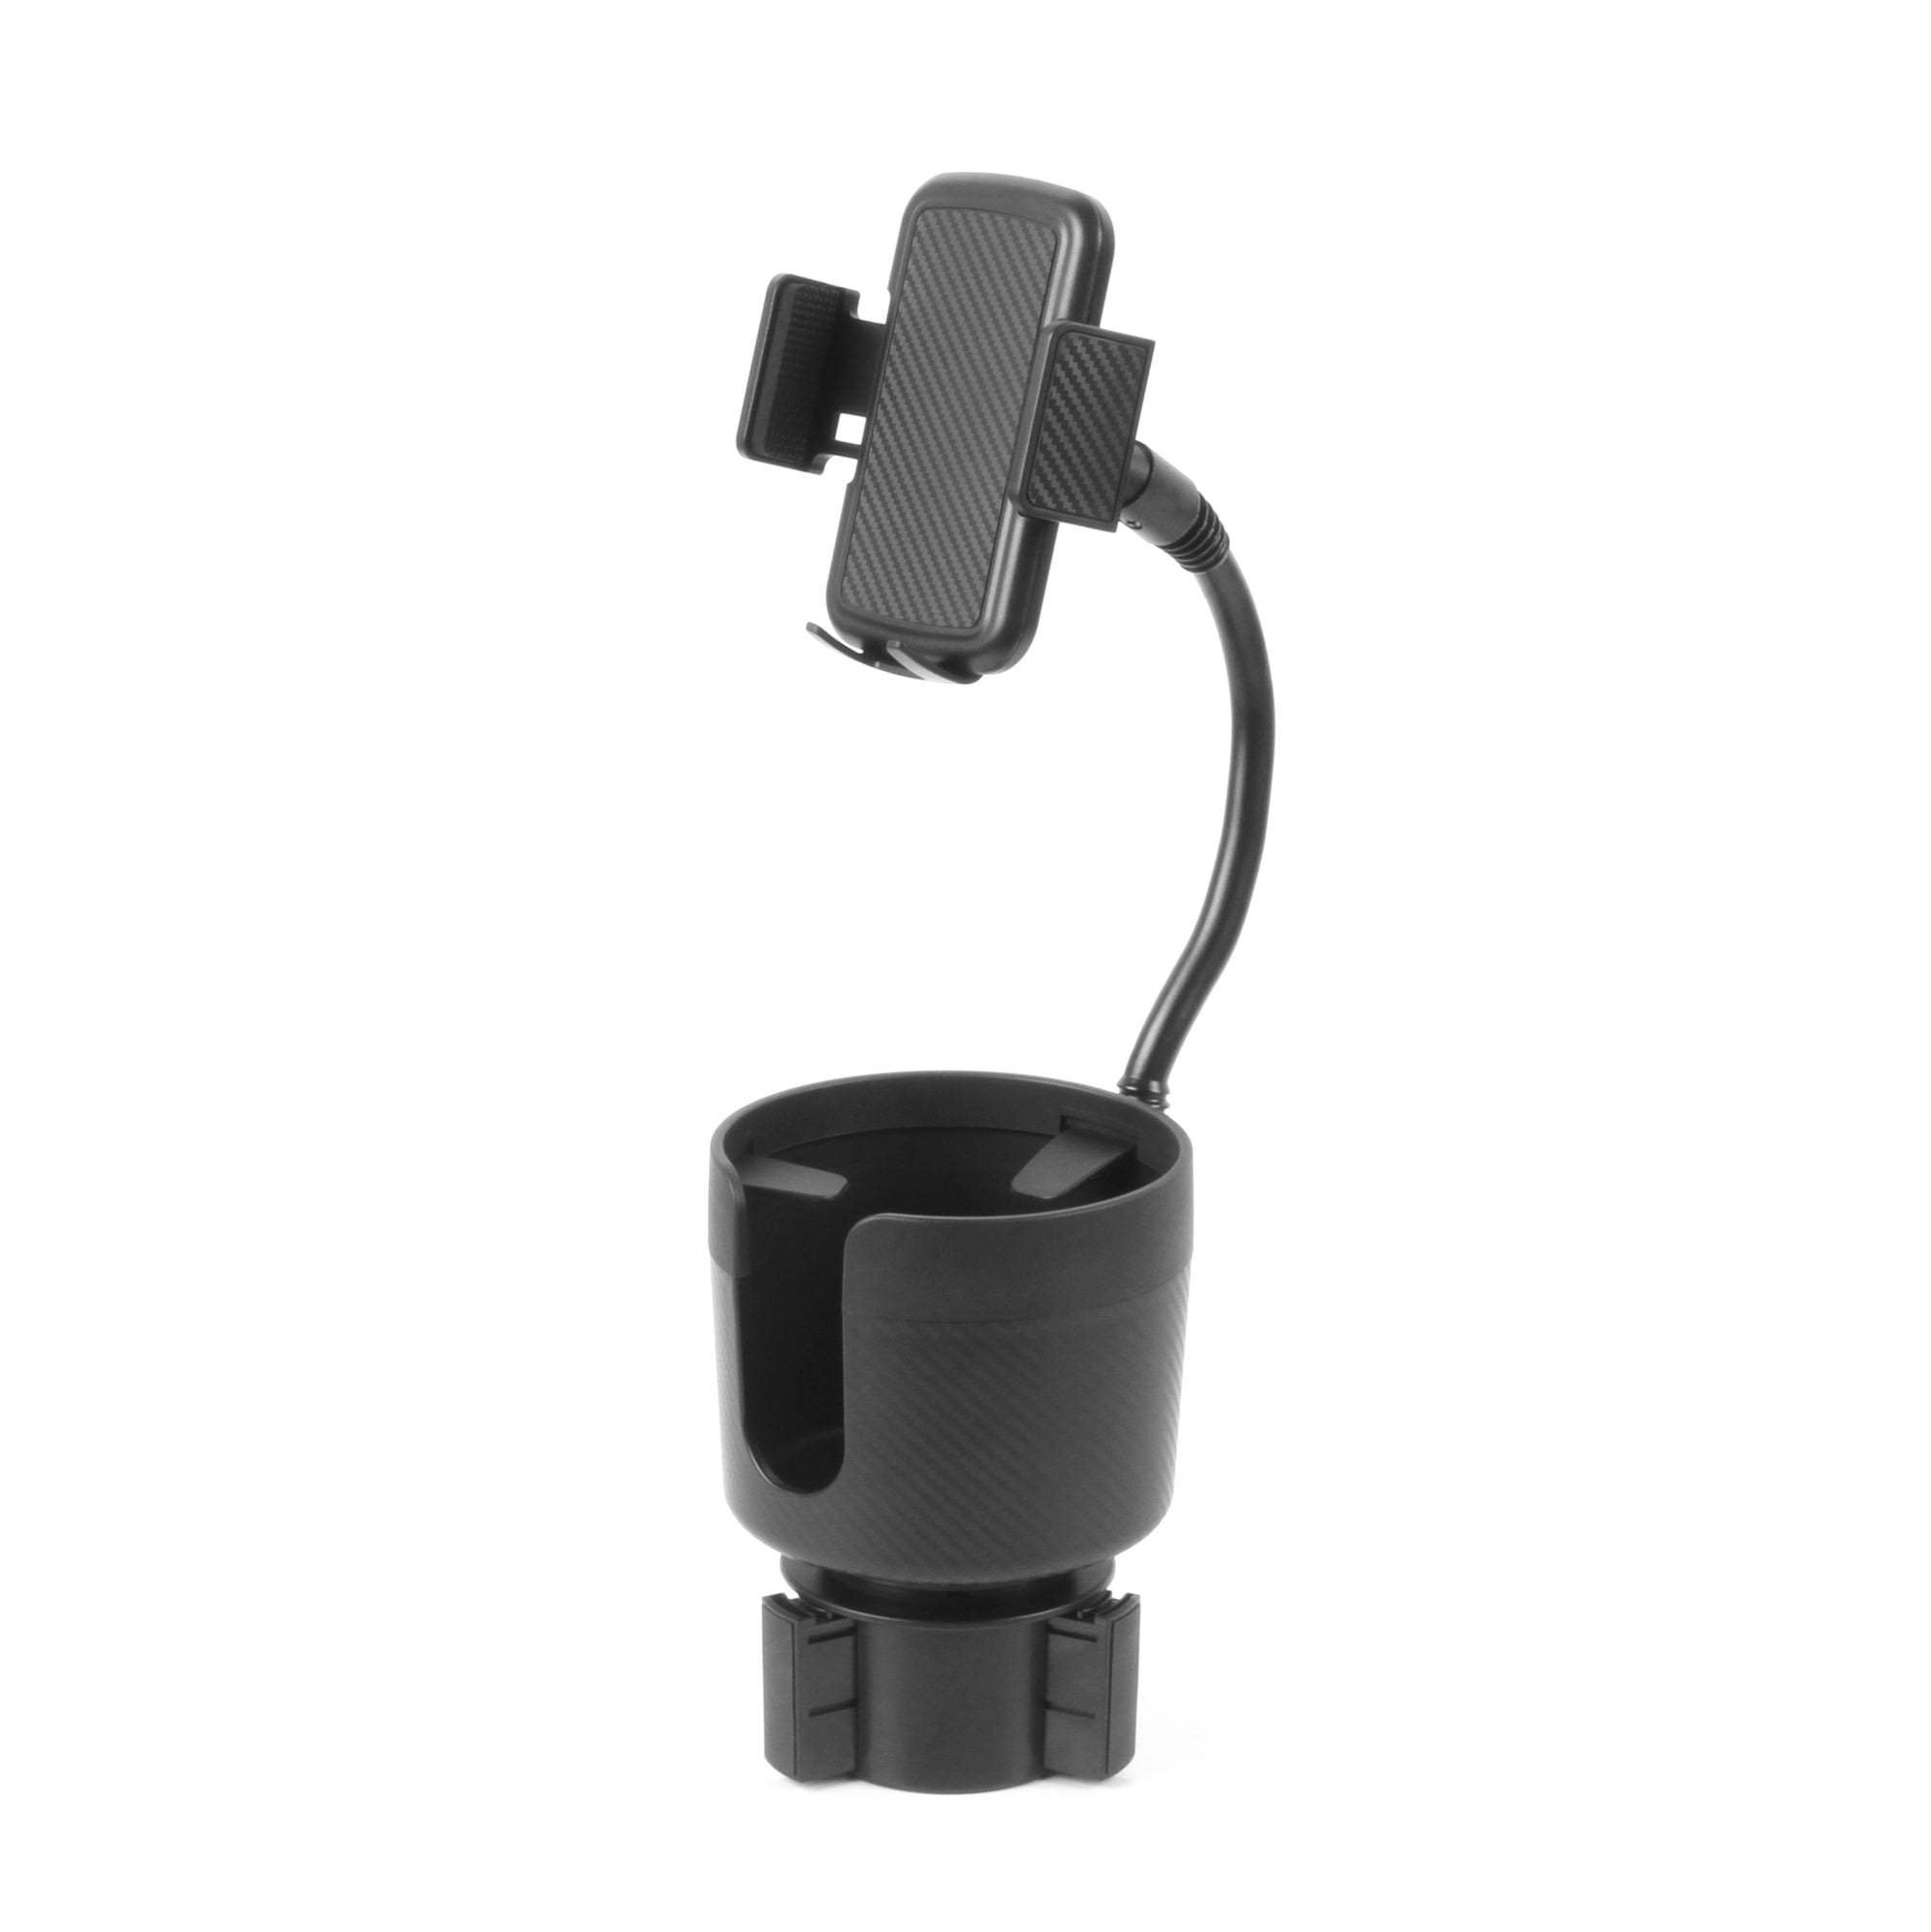 ZIHHO Cup Holder Expander for Car with Phone Holder, India